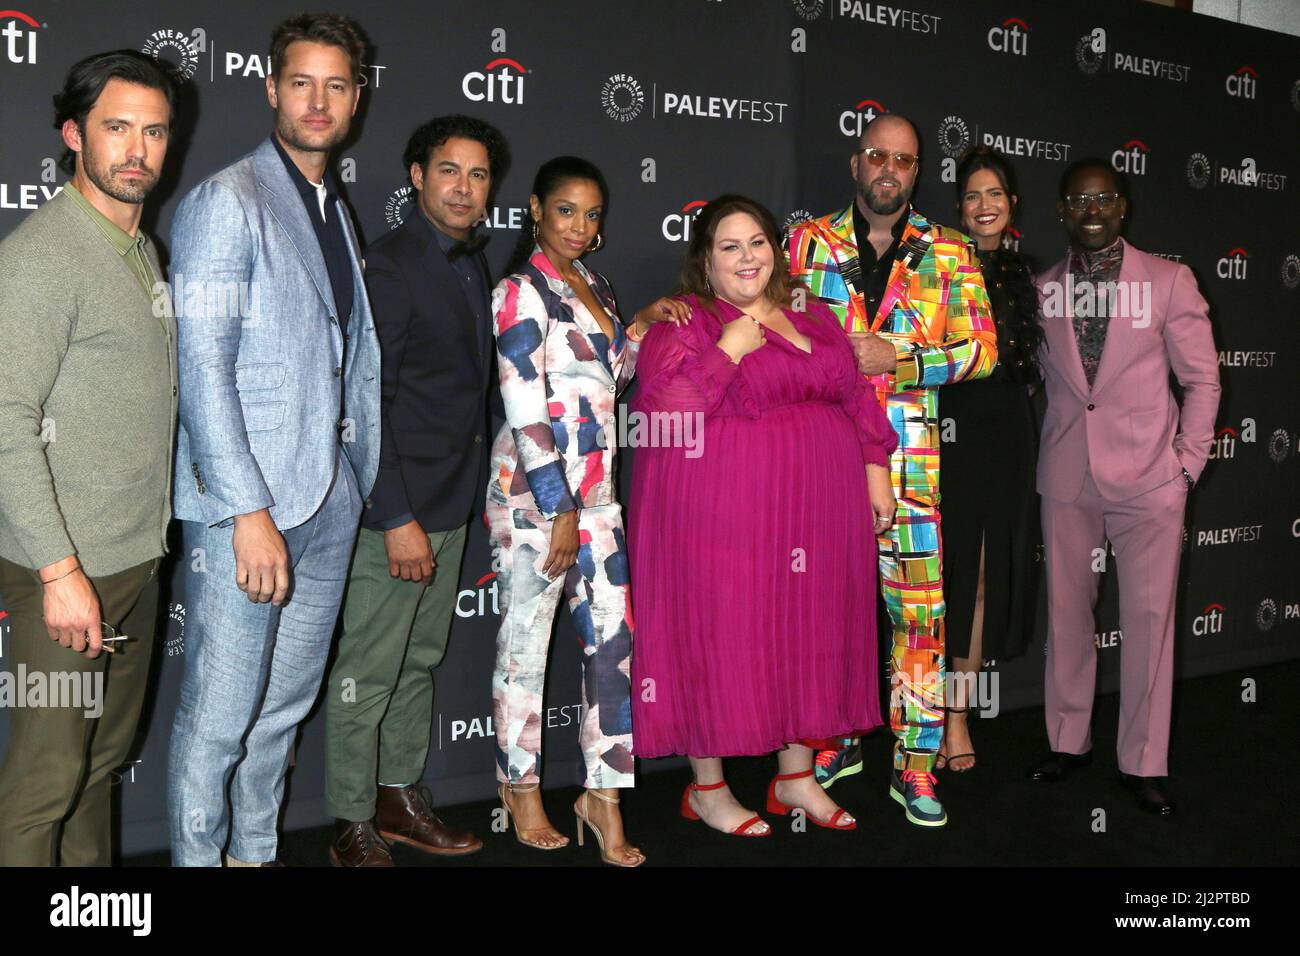 LOS ANGELES - APR 2:  Milo Ventimiglia, Justin Hartley, Jon Huertas, Susan Kelechi Watson, Chrissy Metz, Chris Sullivan, Mandy Moore, Sterling K. Brown at the PaleyFEST - This is Us at Dolby Theater on April 2, 2022  in Los Angeles, CA Stock Photo